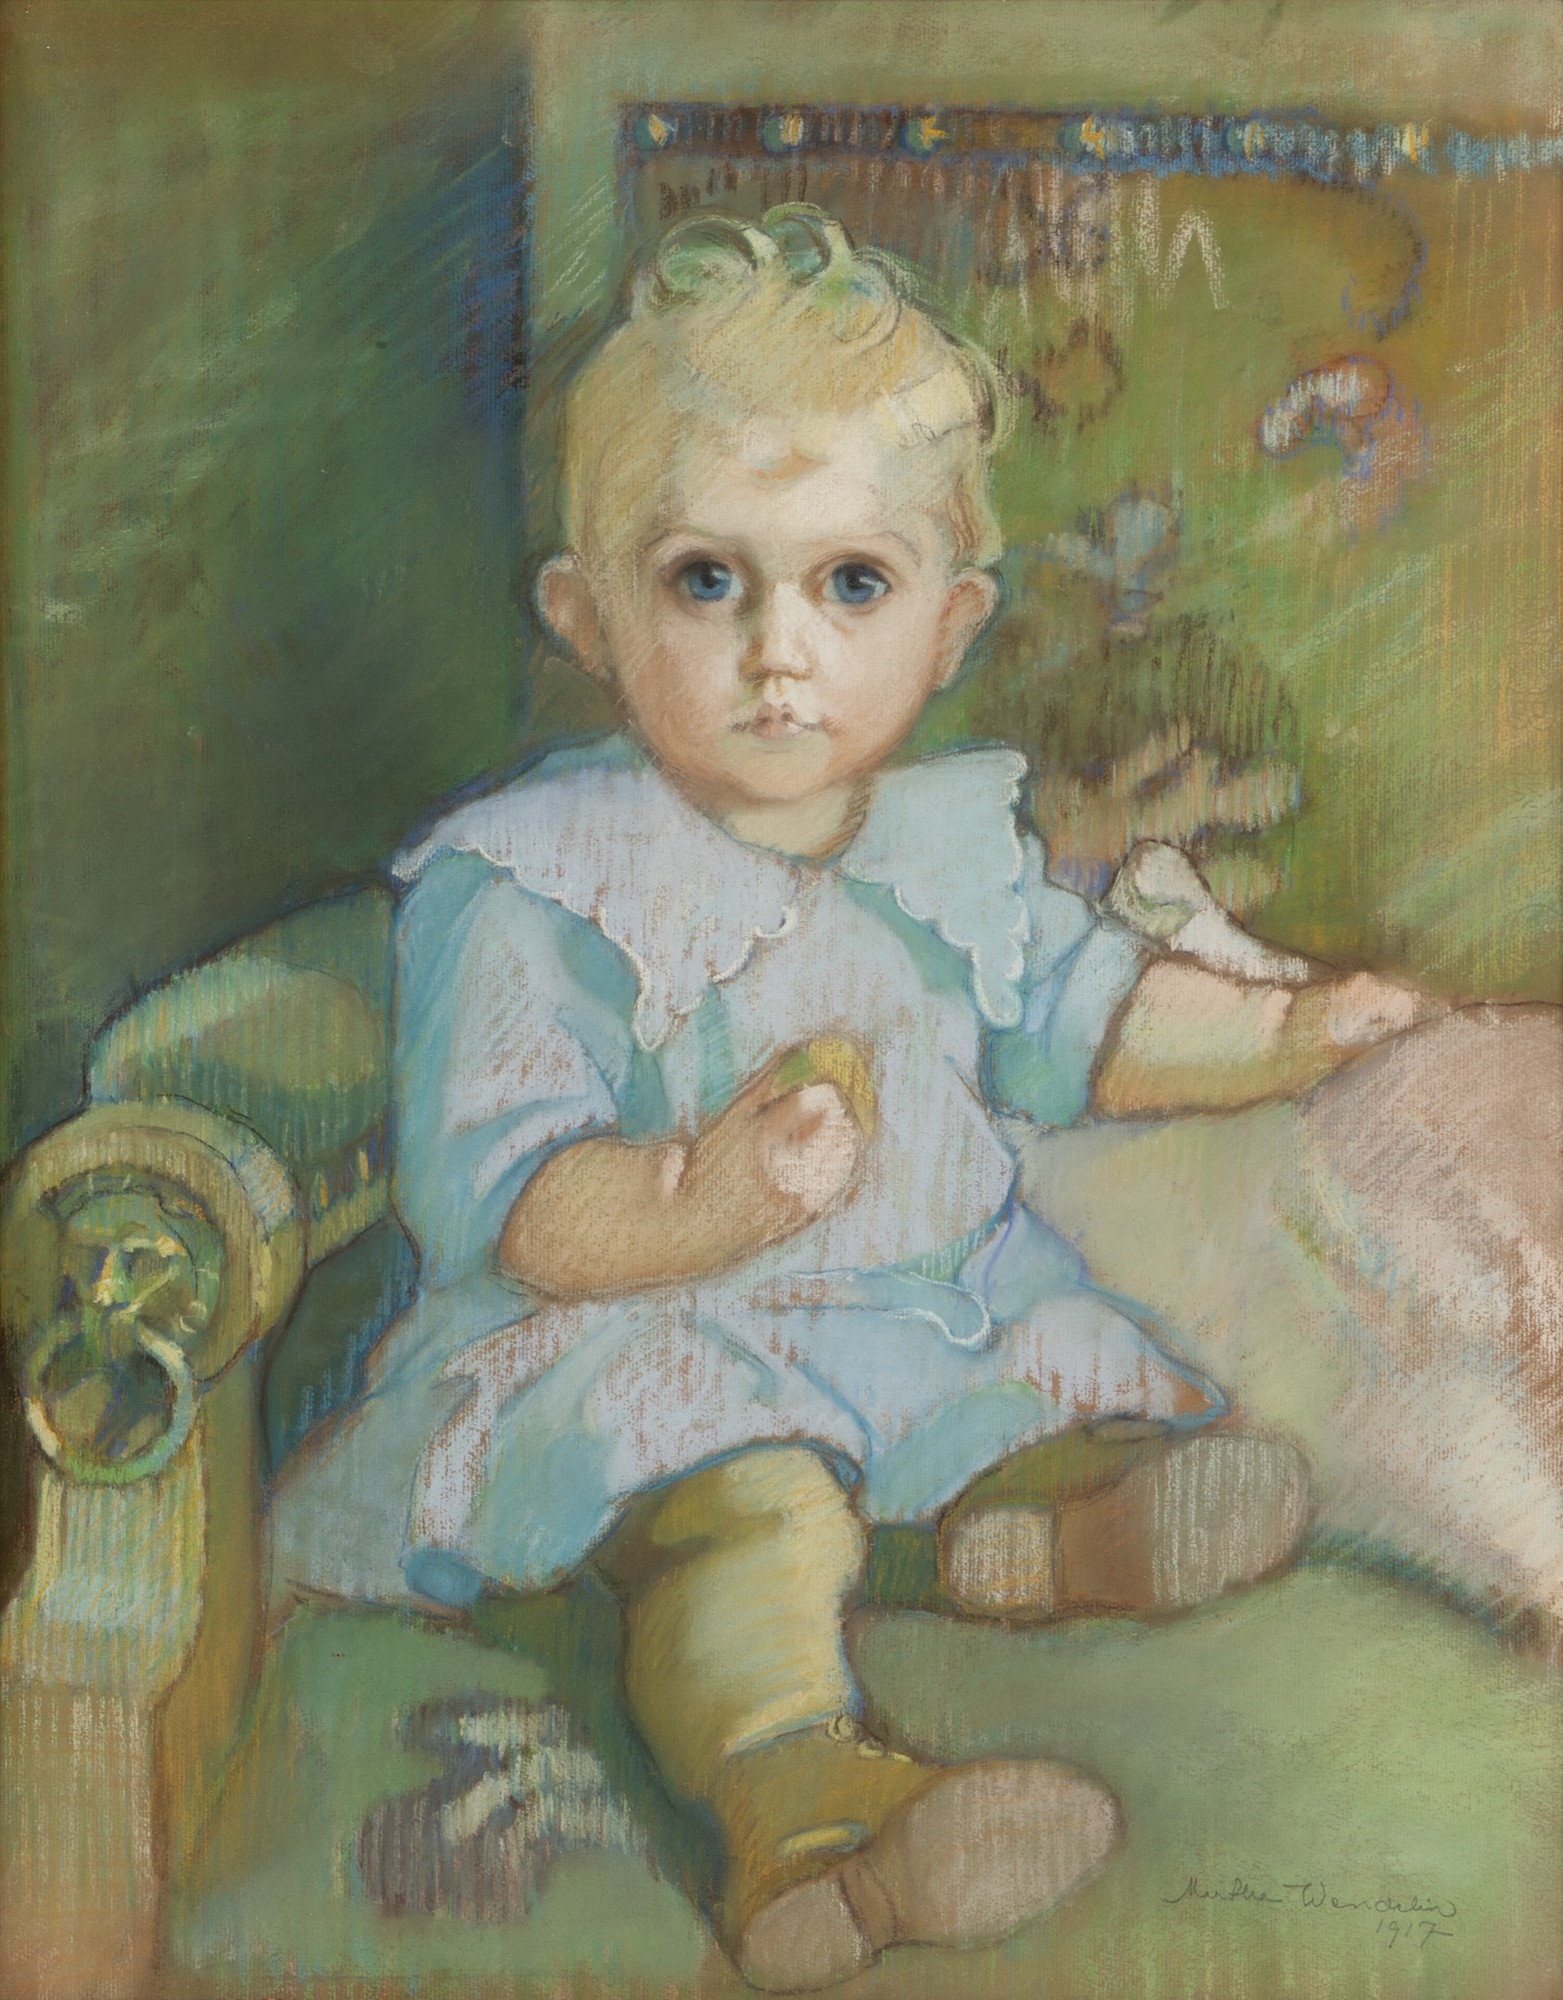 Artwork by Martta Wendelin, A Portrait of a Child, Made of pastel